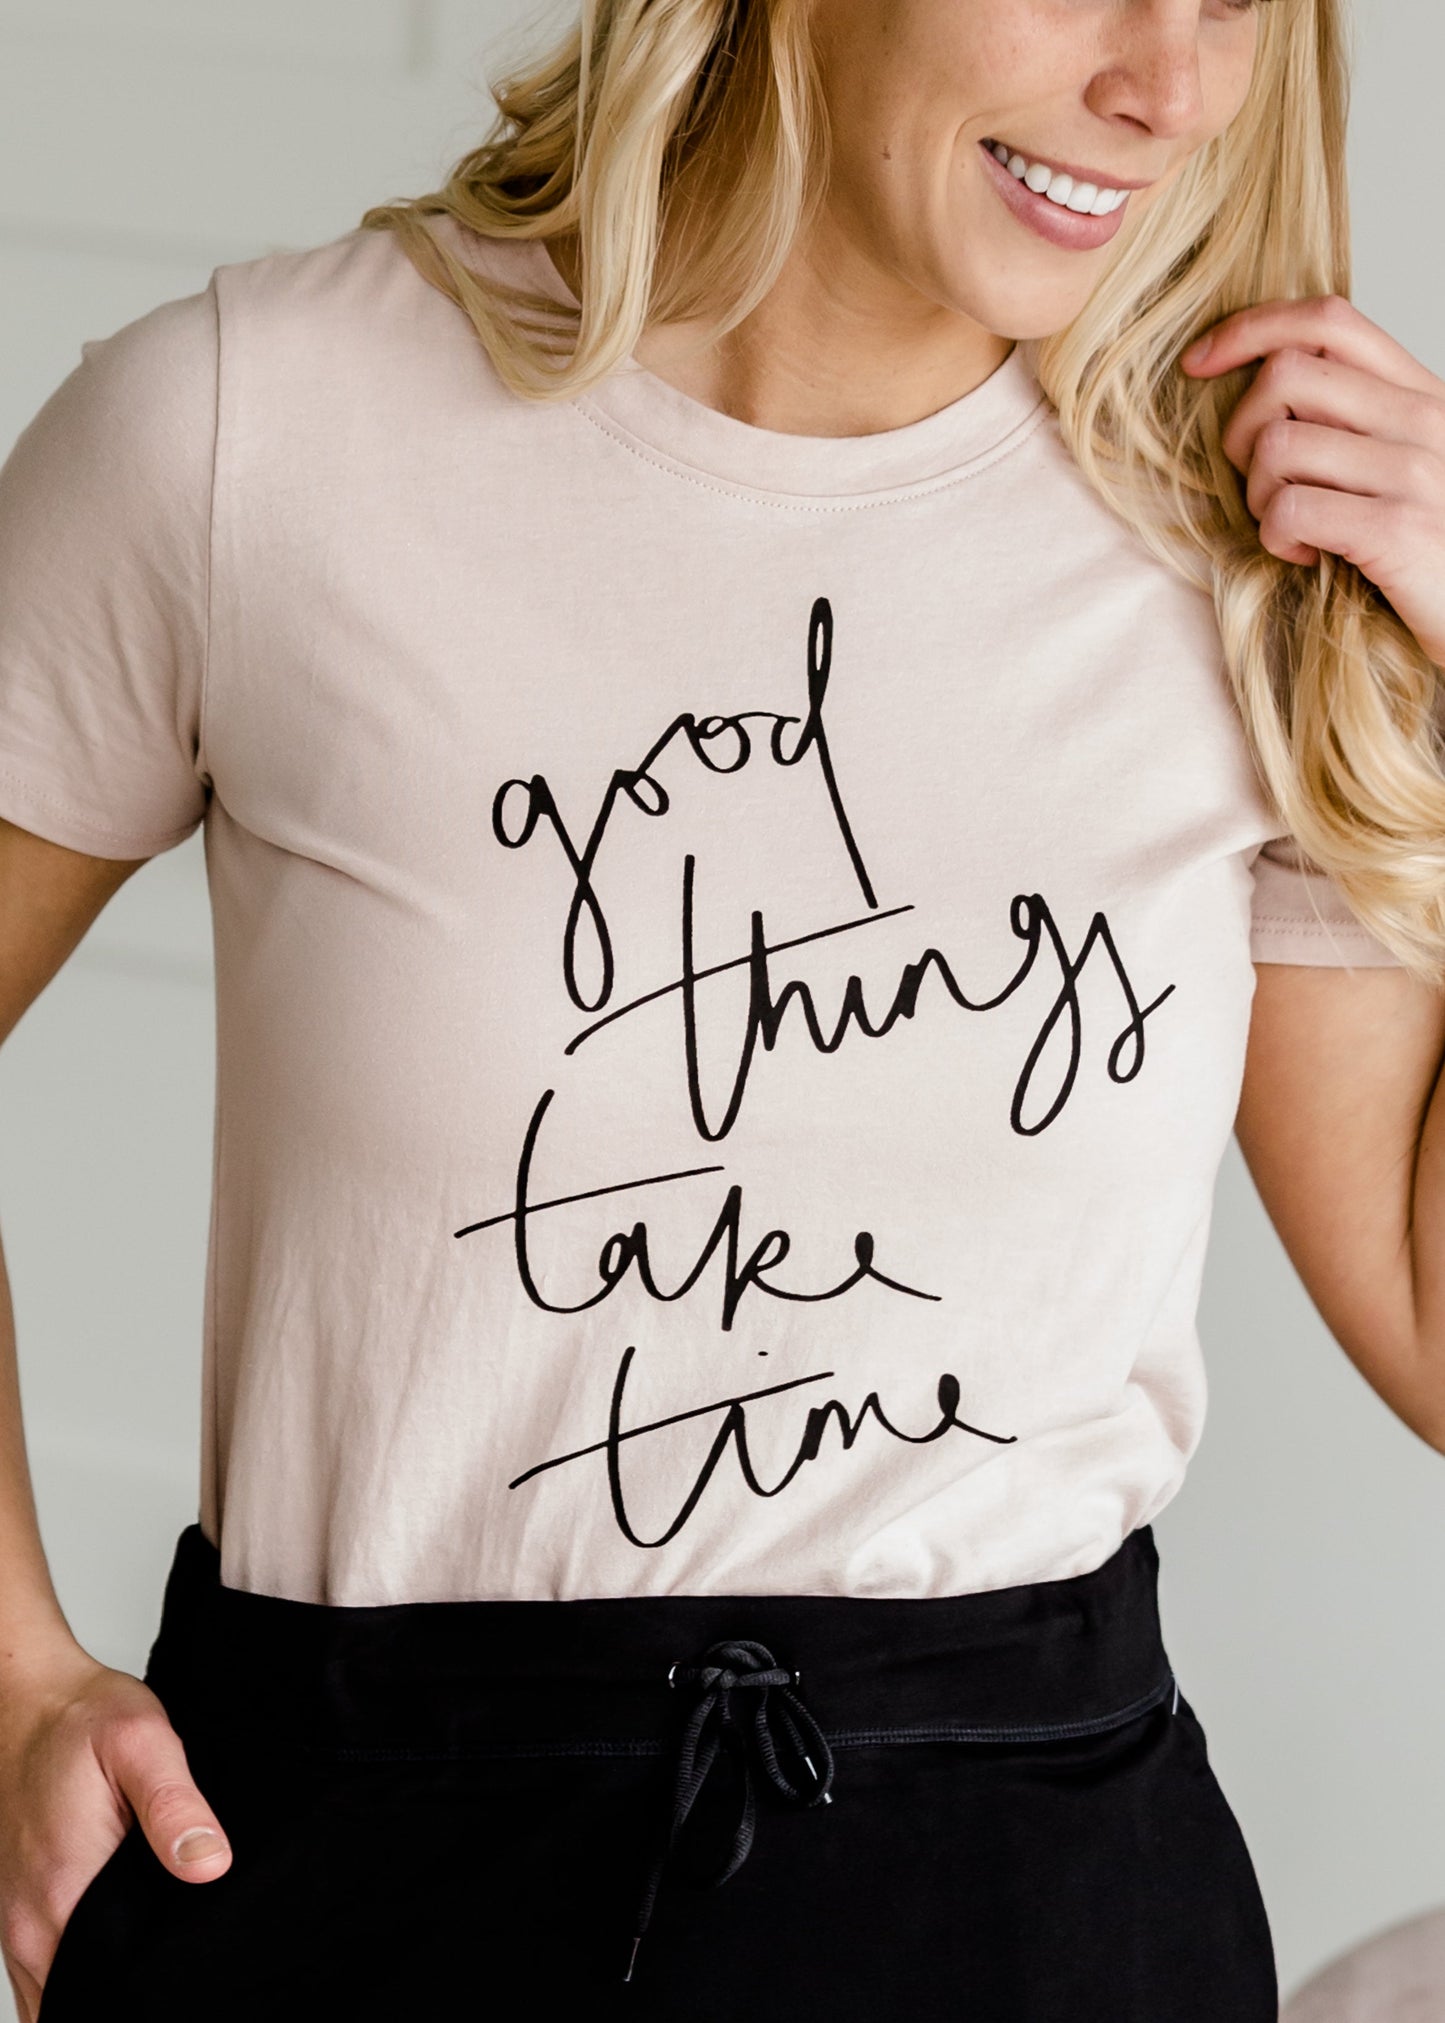 Good Things Take Time Graphic Top - FINAL SALE Tops